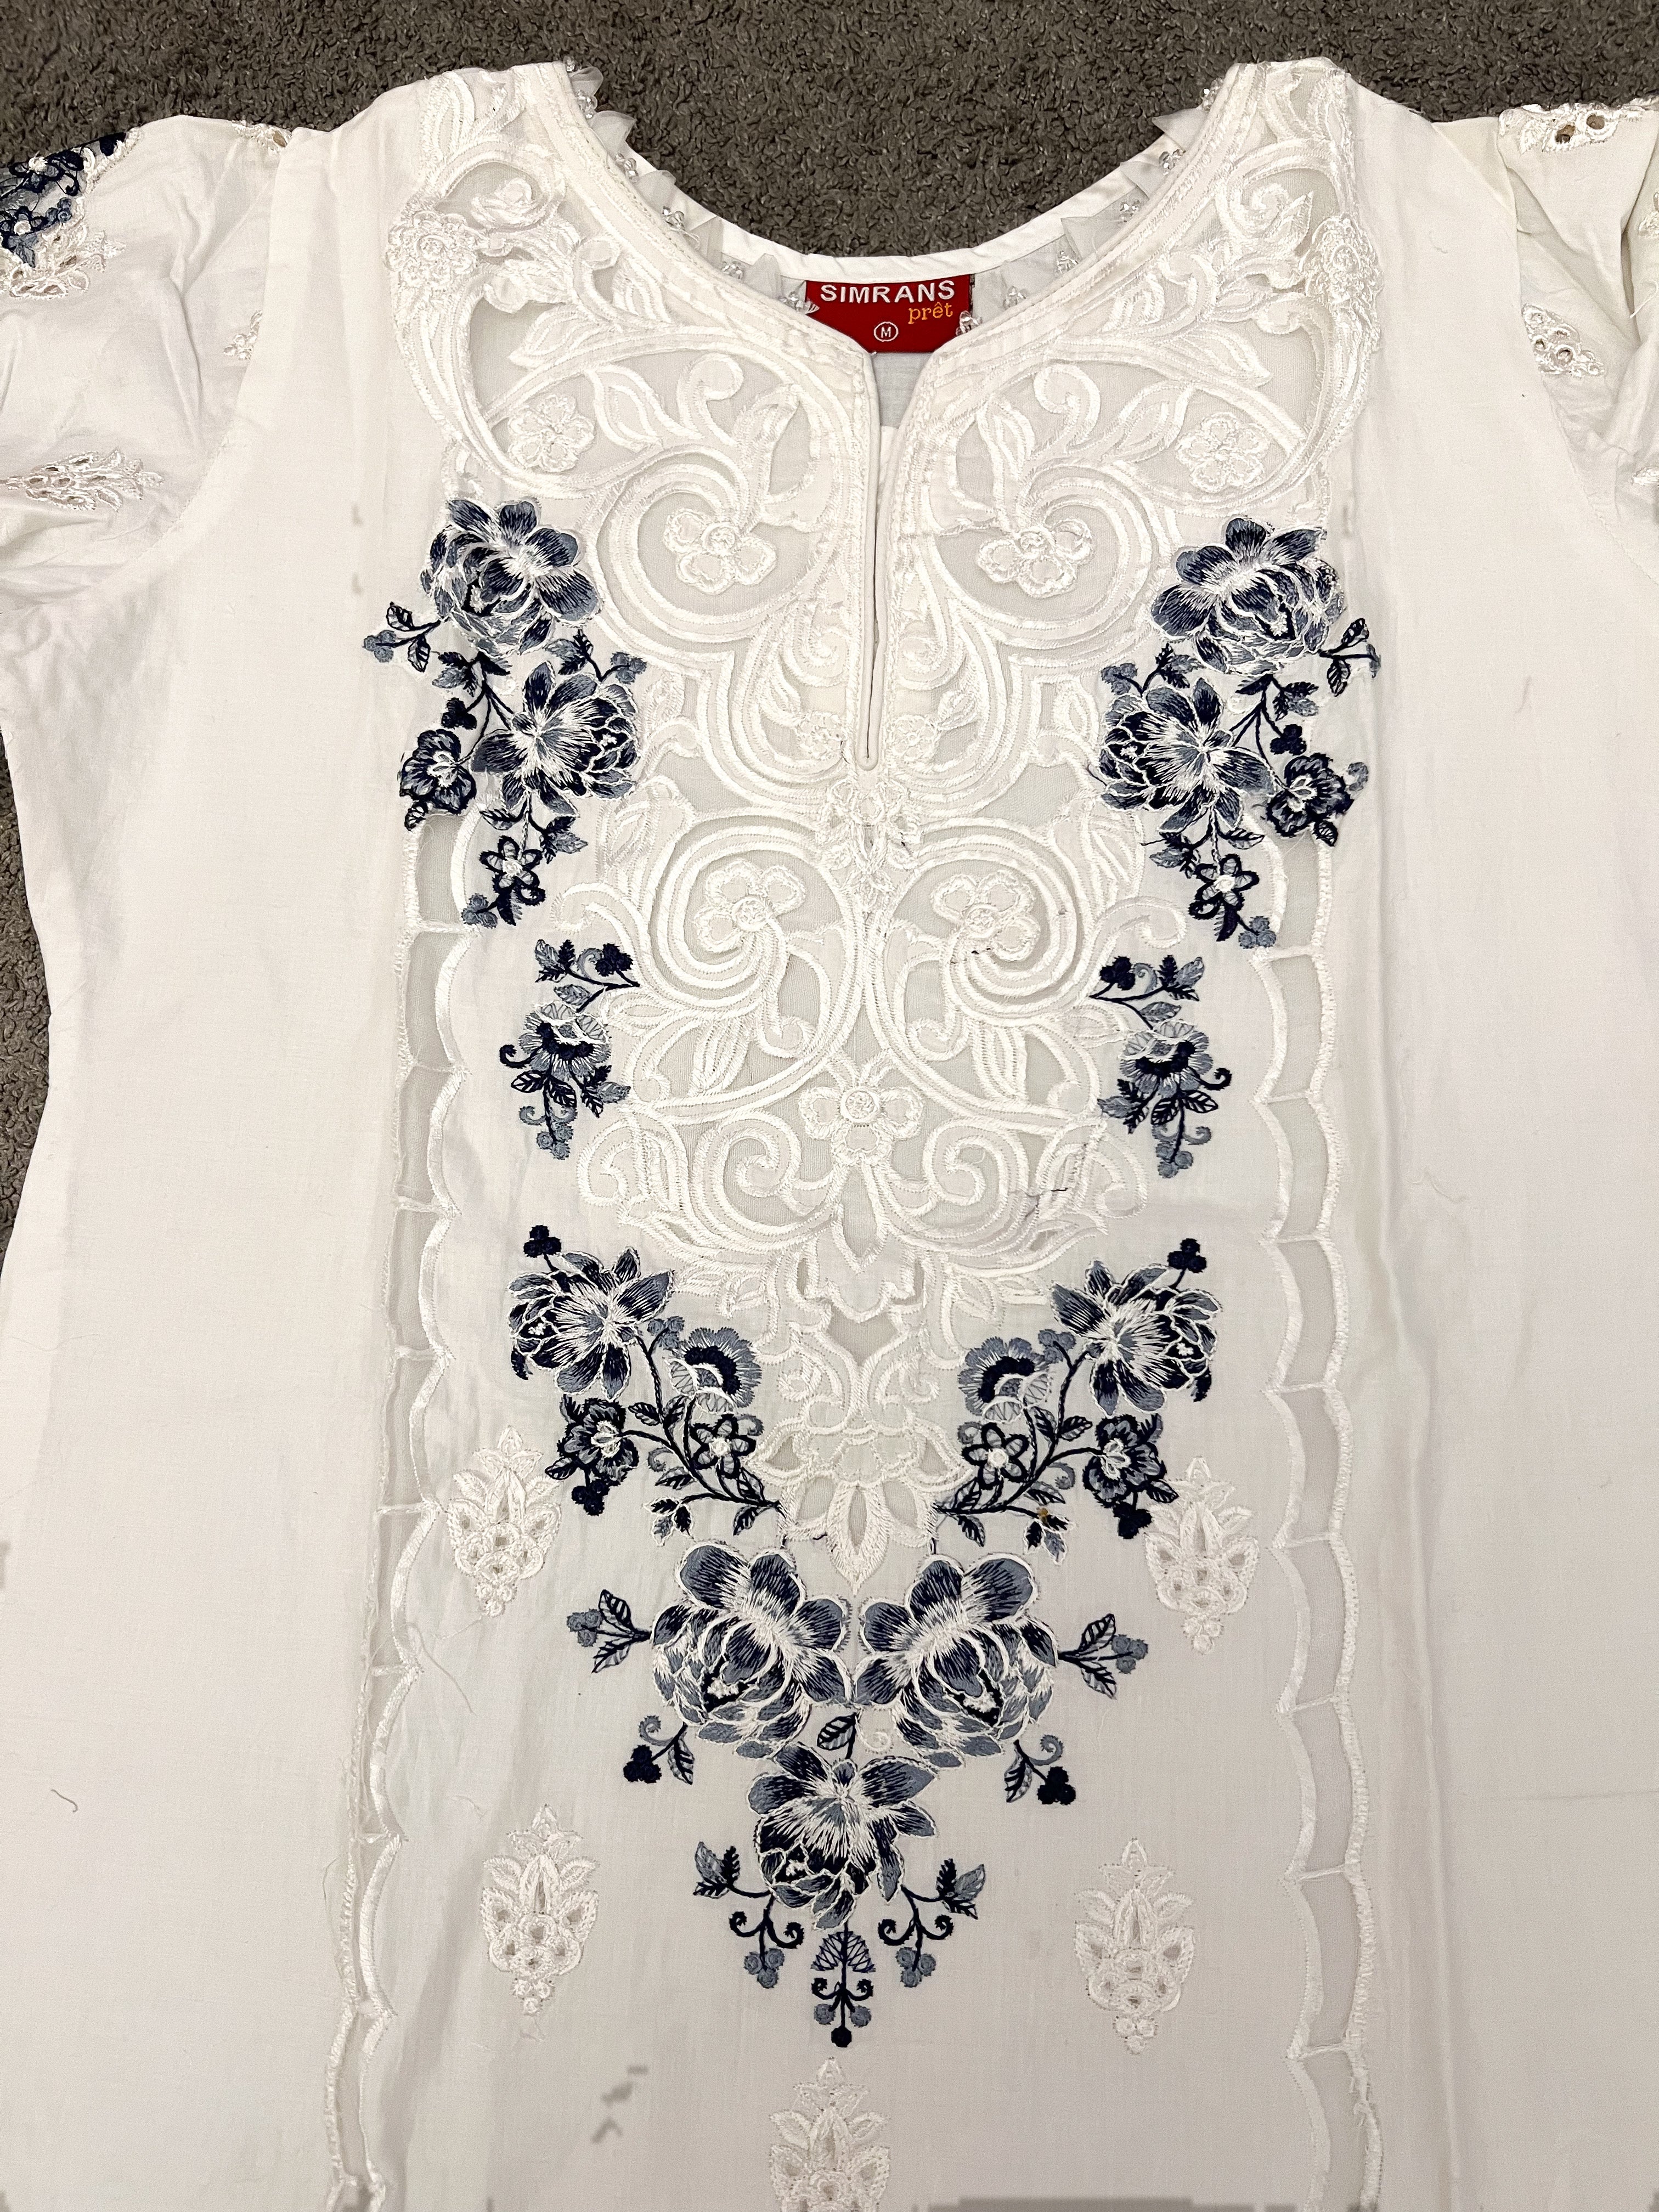 Maria B Inspired Embroidered White 3 Piece Outfit With Net Dupatta - Desi Posh